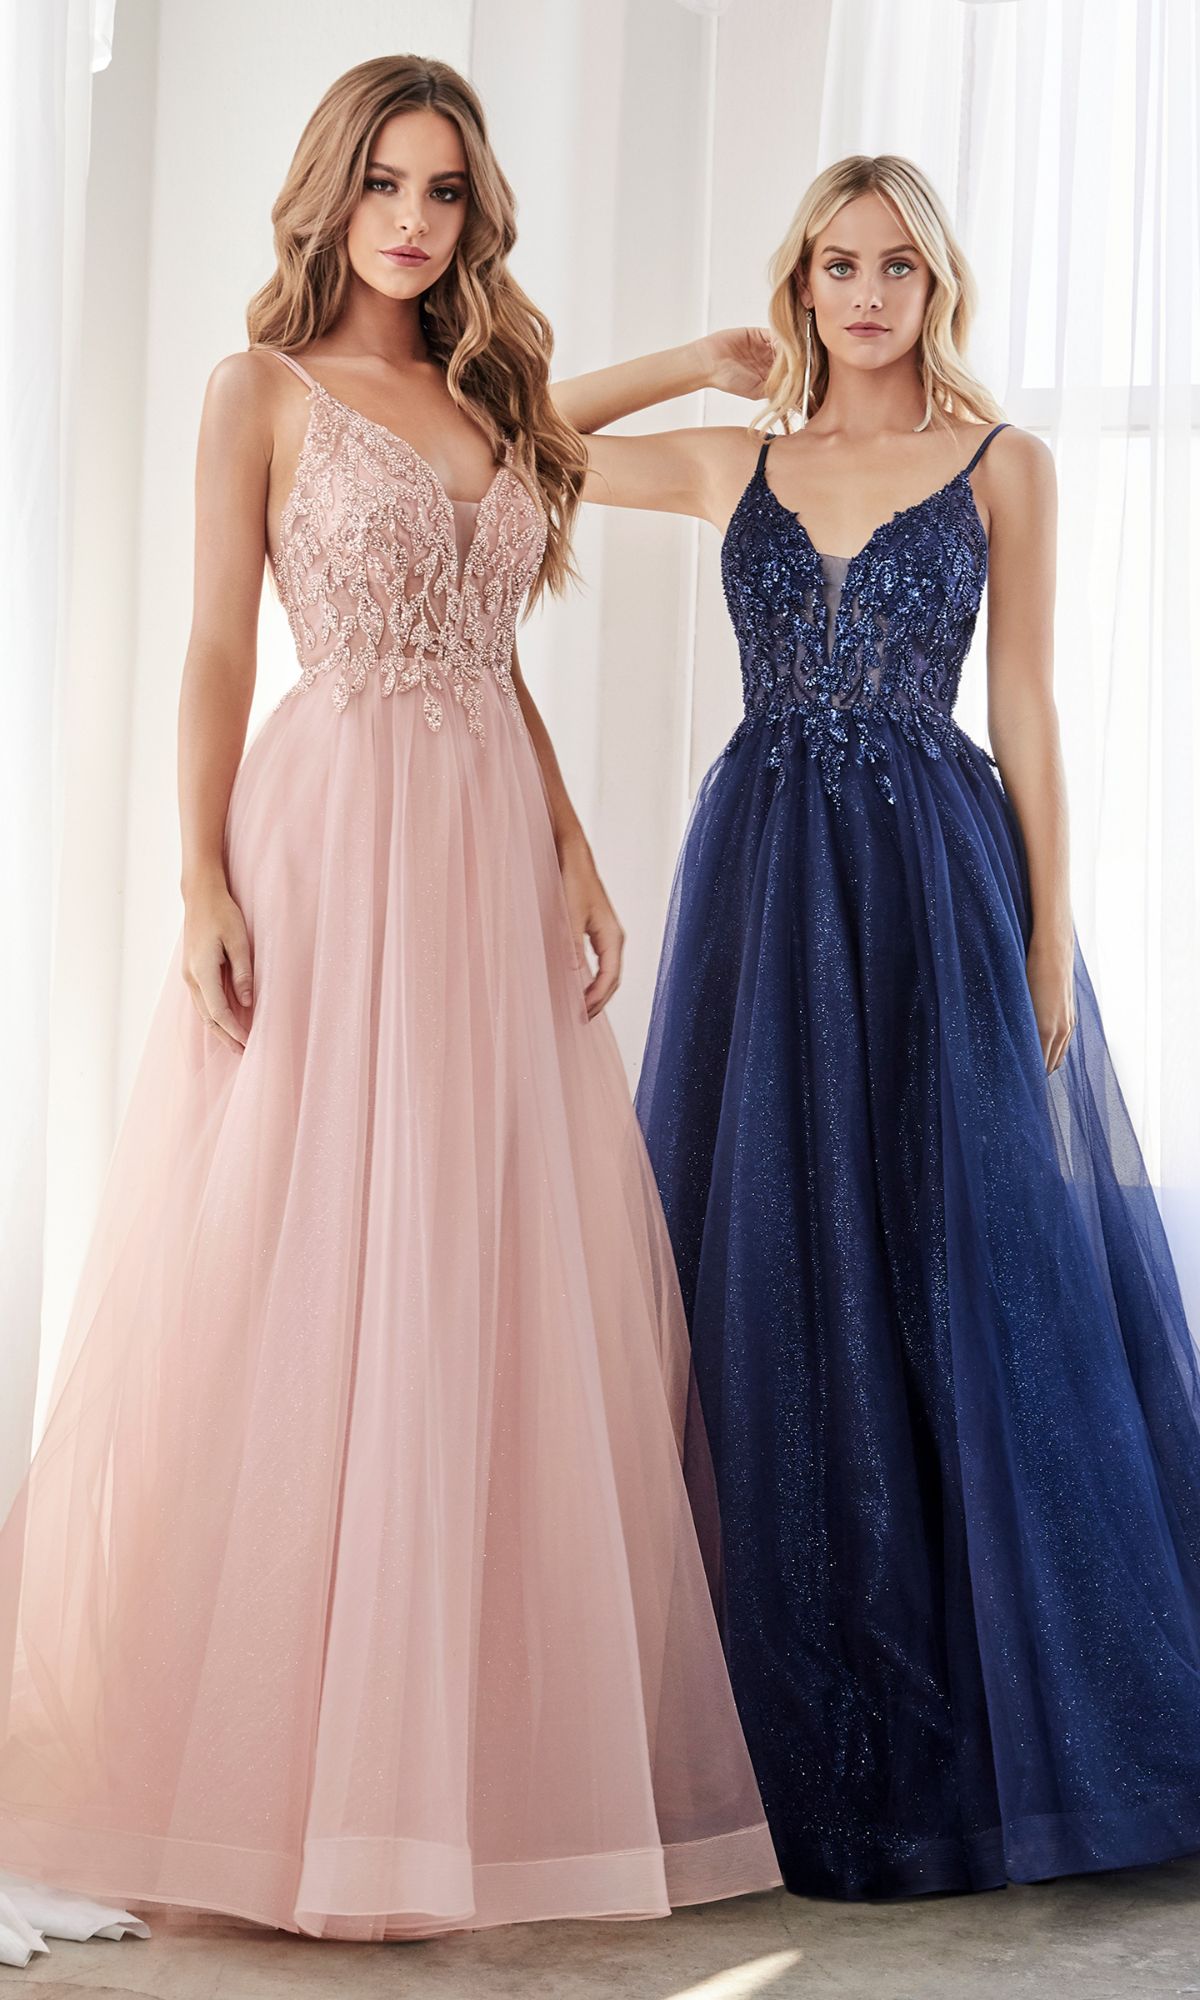 Long Sheer-Corset Prom Ball Gown - PromGirl